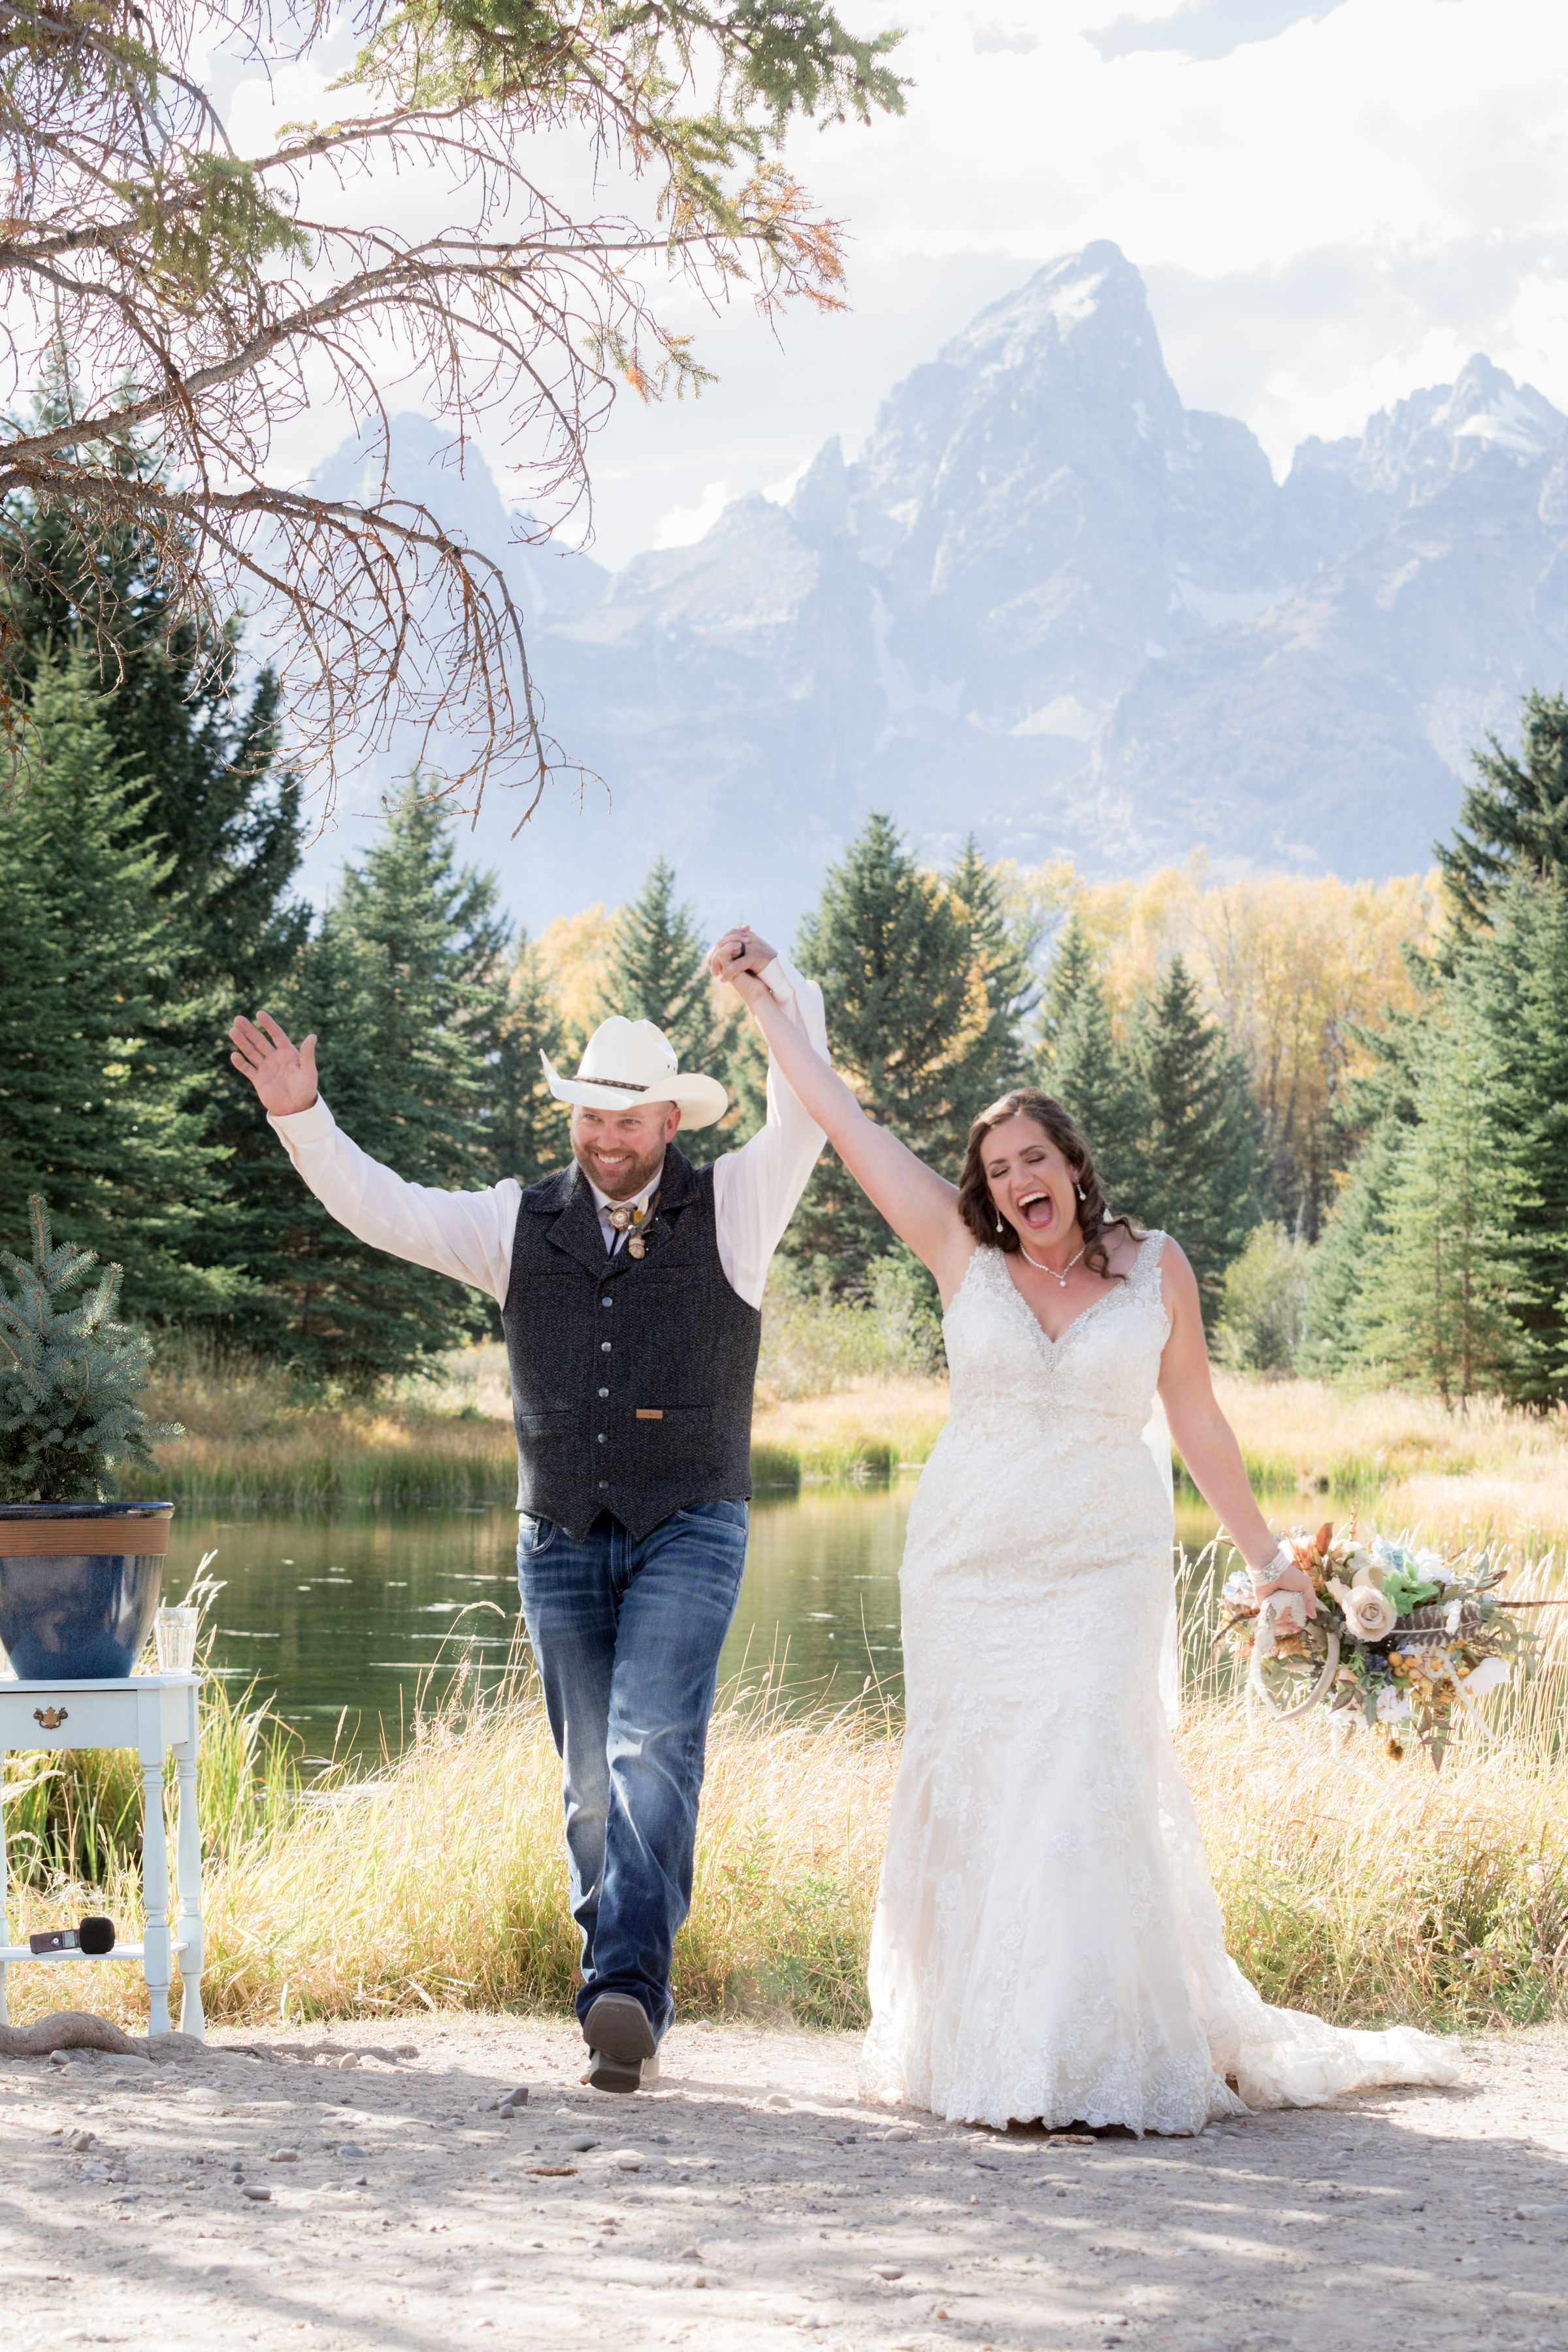 Just married in Grand Teton National Park